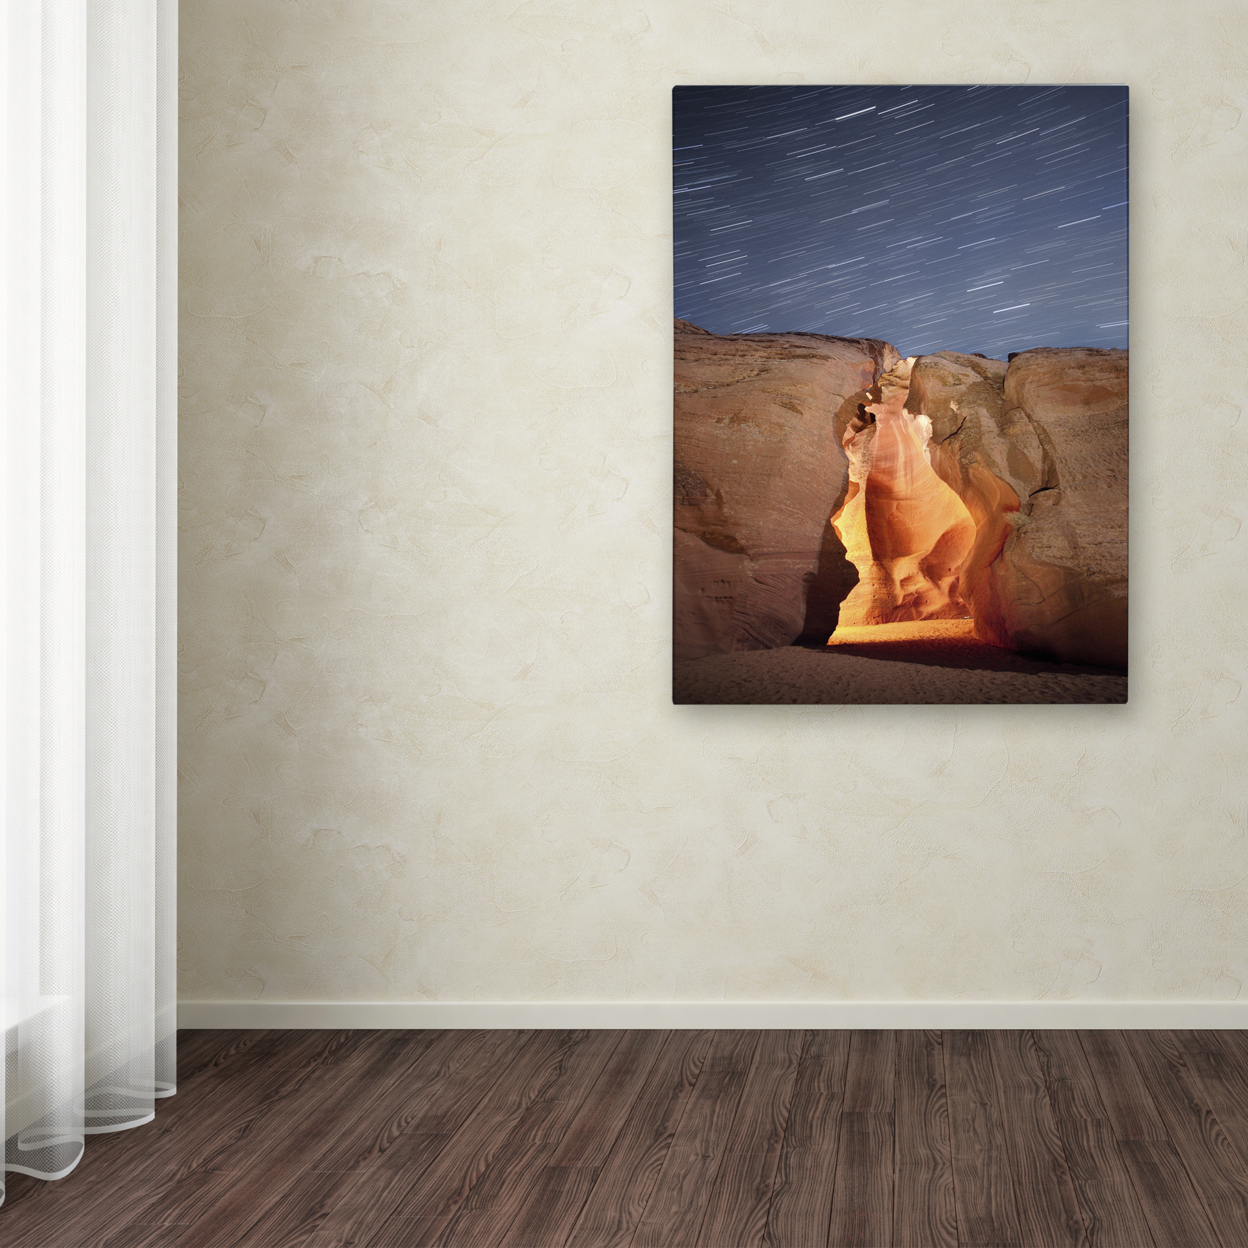 Moises Levy 'Flame' Canvas Wall Art 35 X 47 Inches